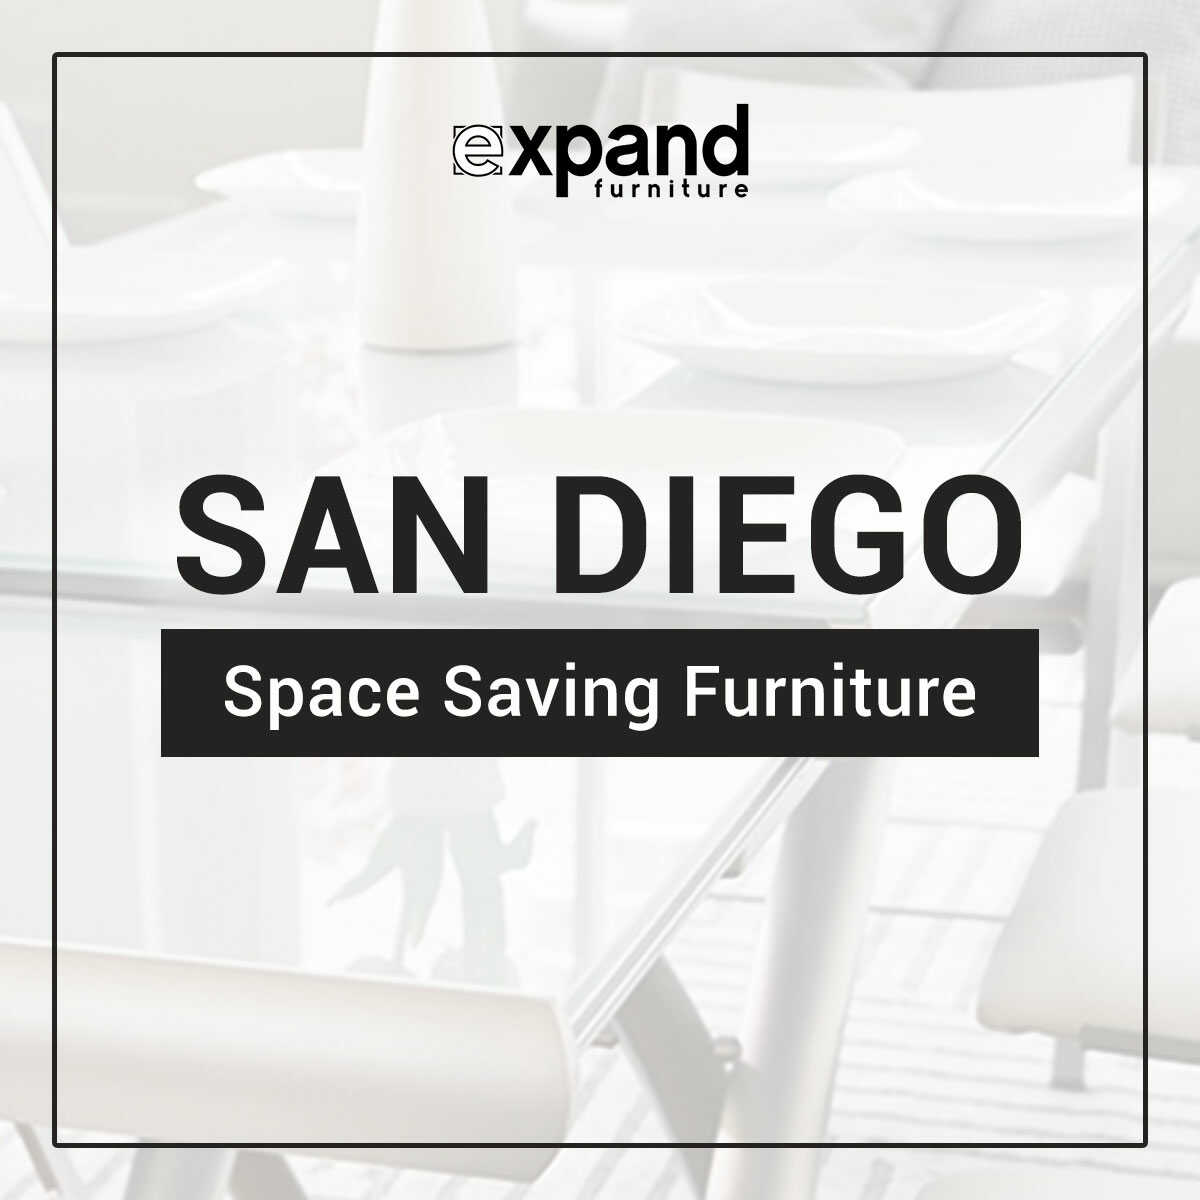 Space Saving Furniture by Expand Furniture